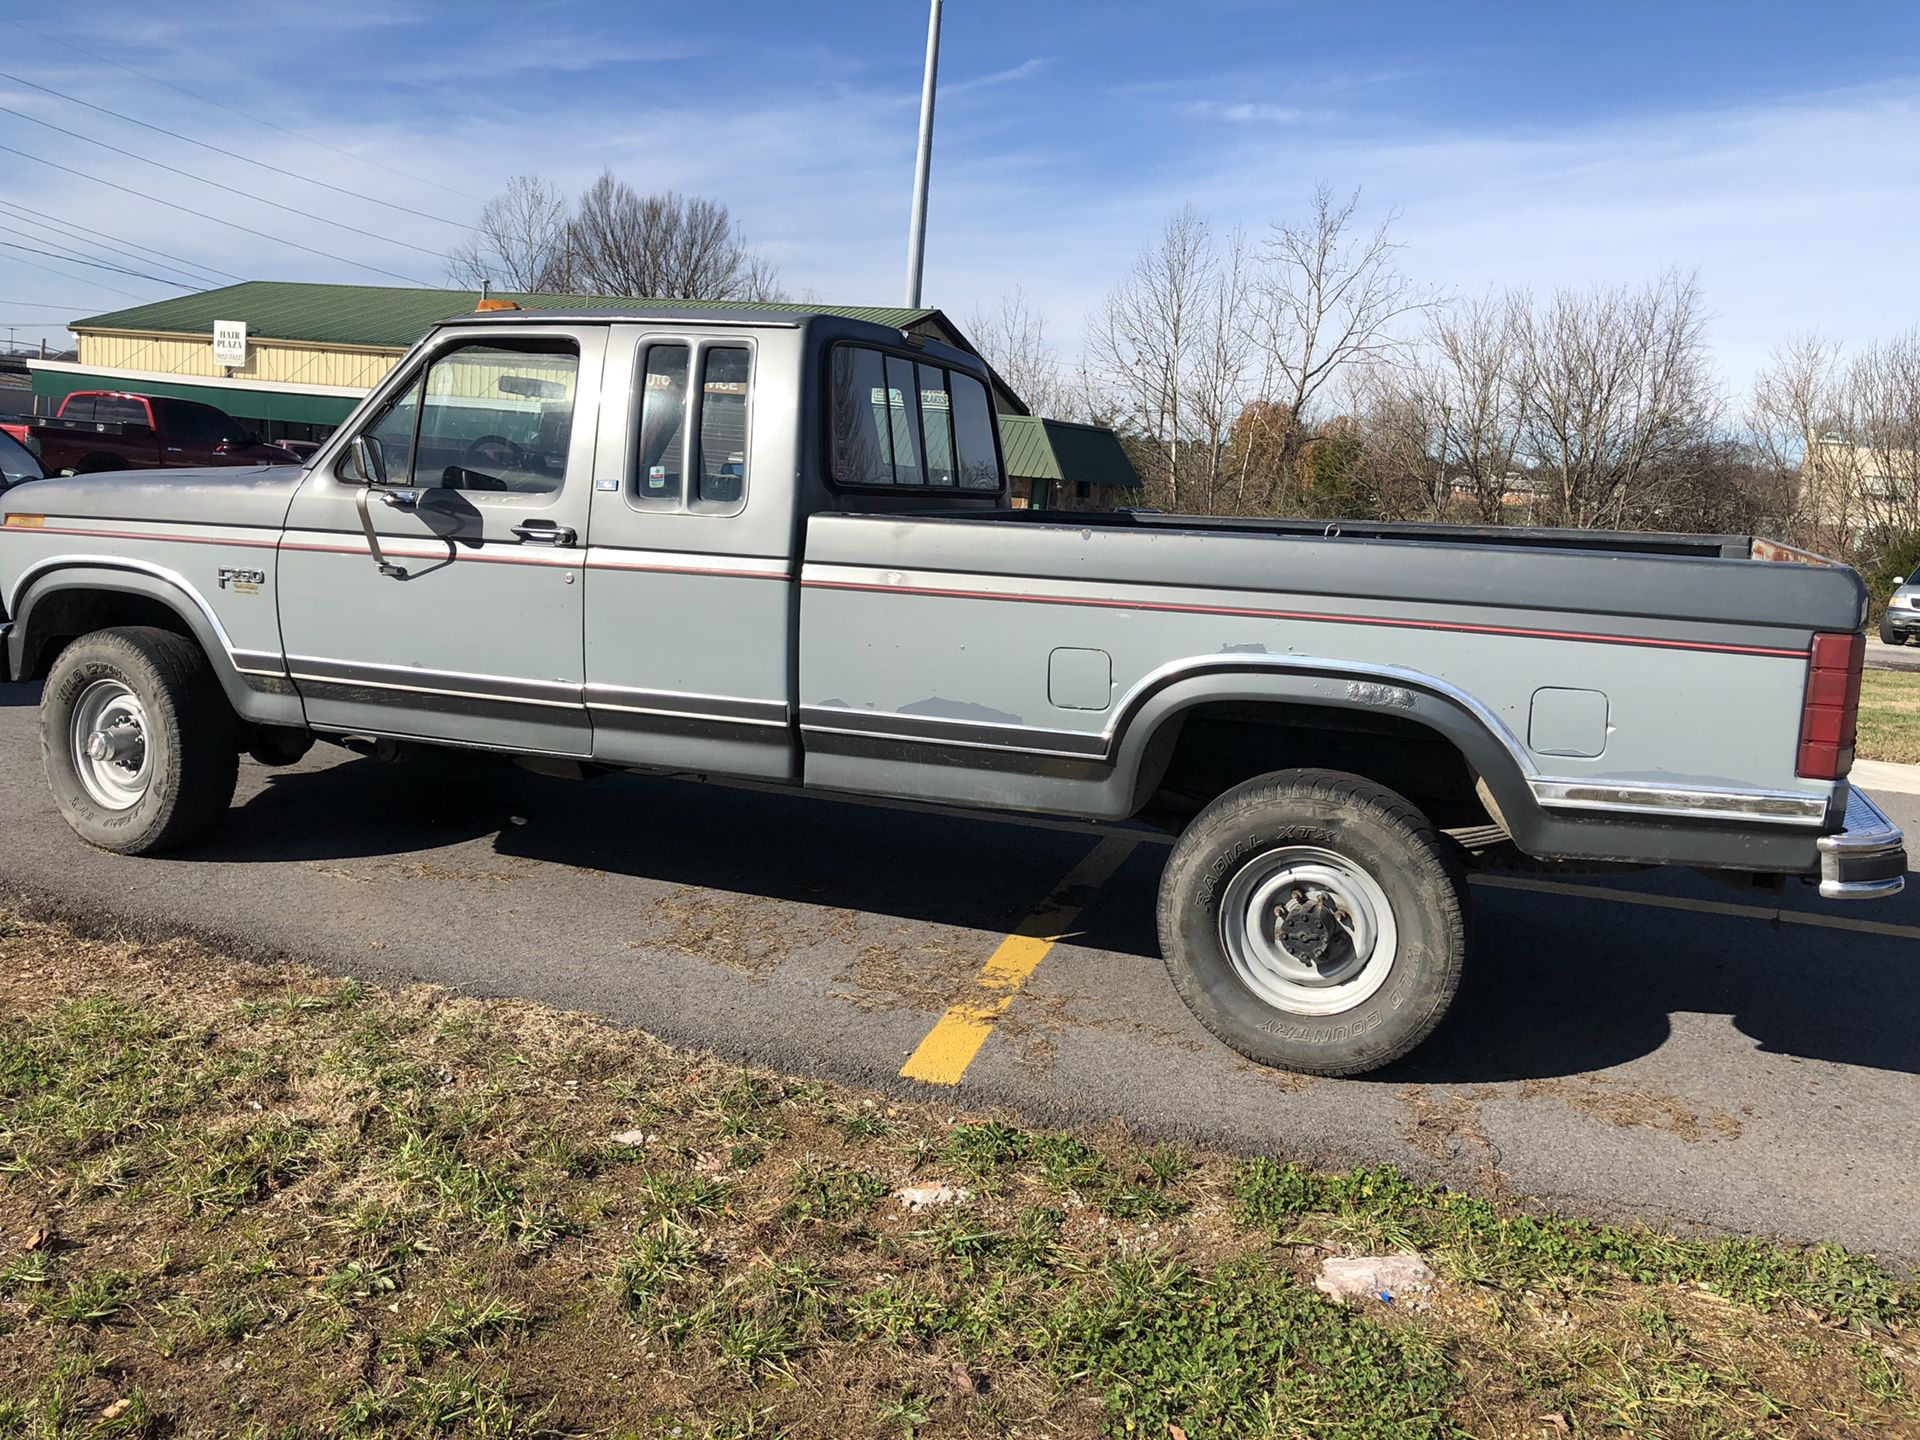 1986 Ford F-250 6.9 diesel new brake lines wheel cylinders and axle seals 91000 actually miles